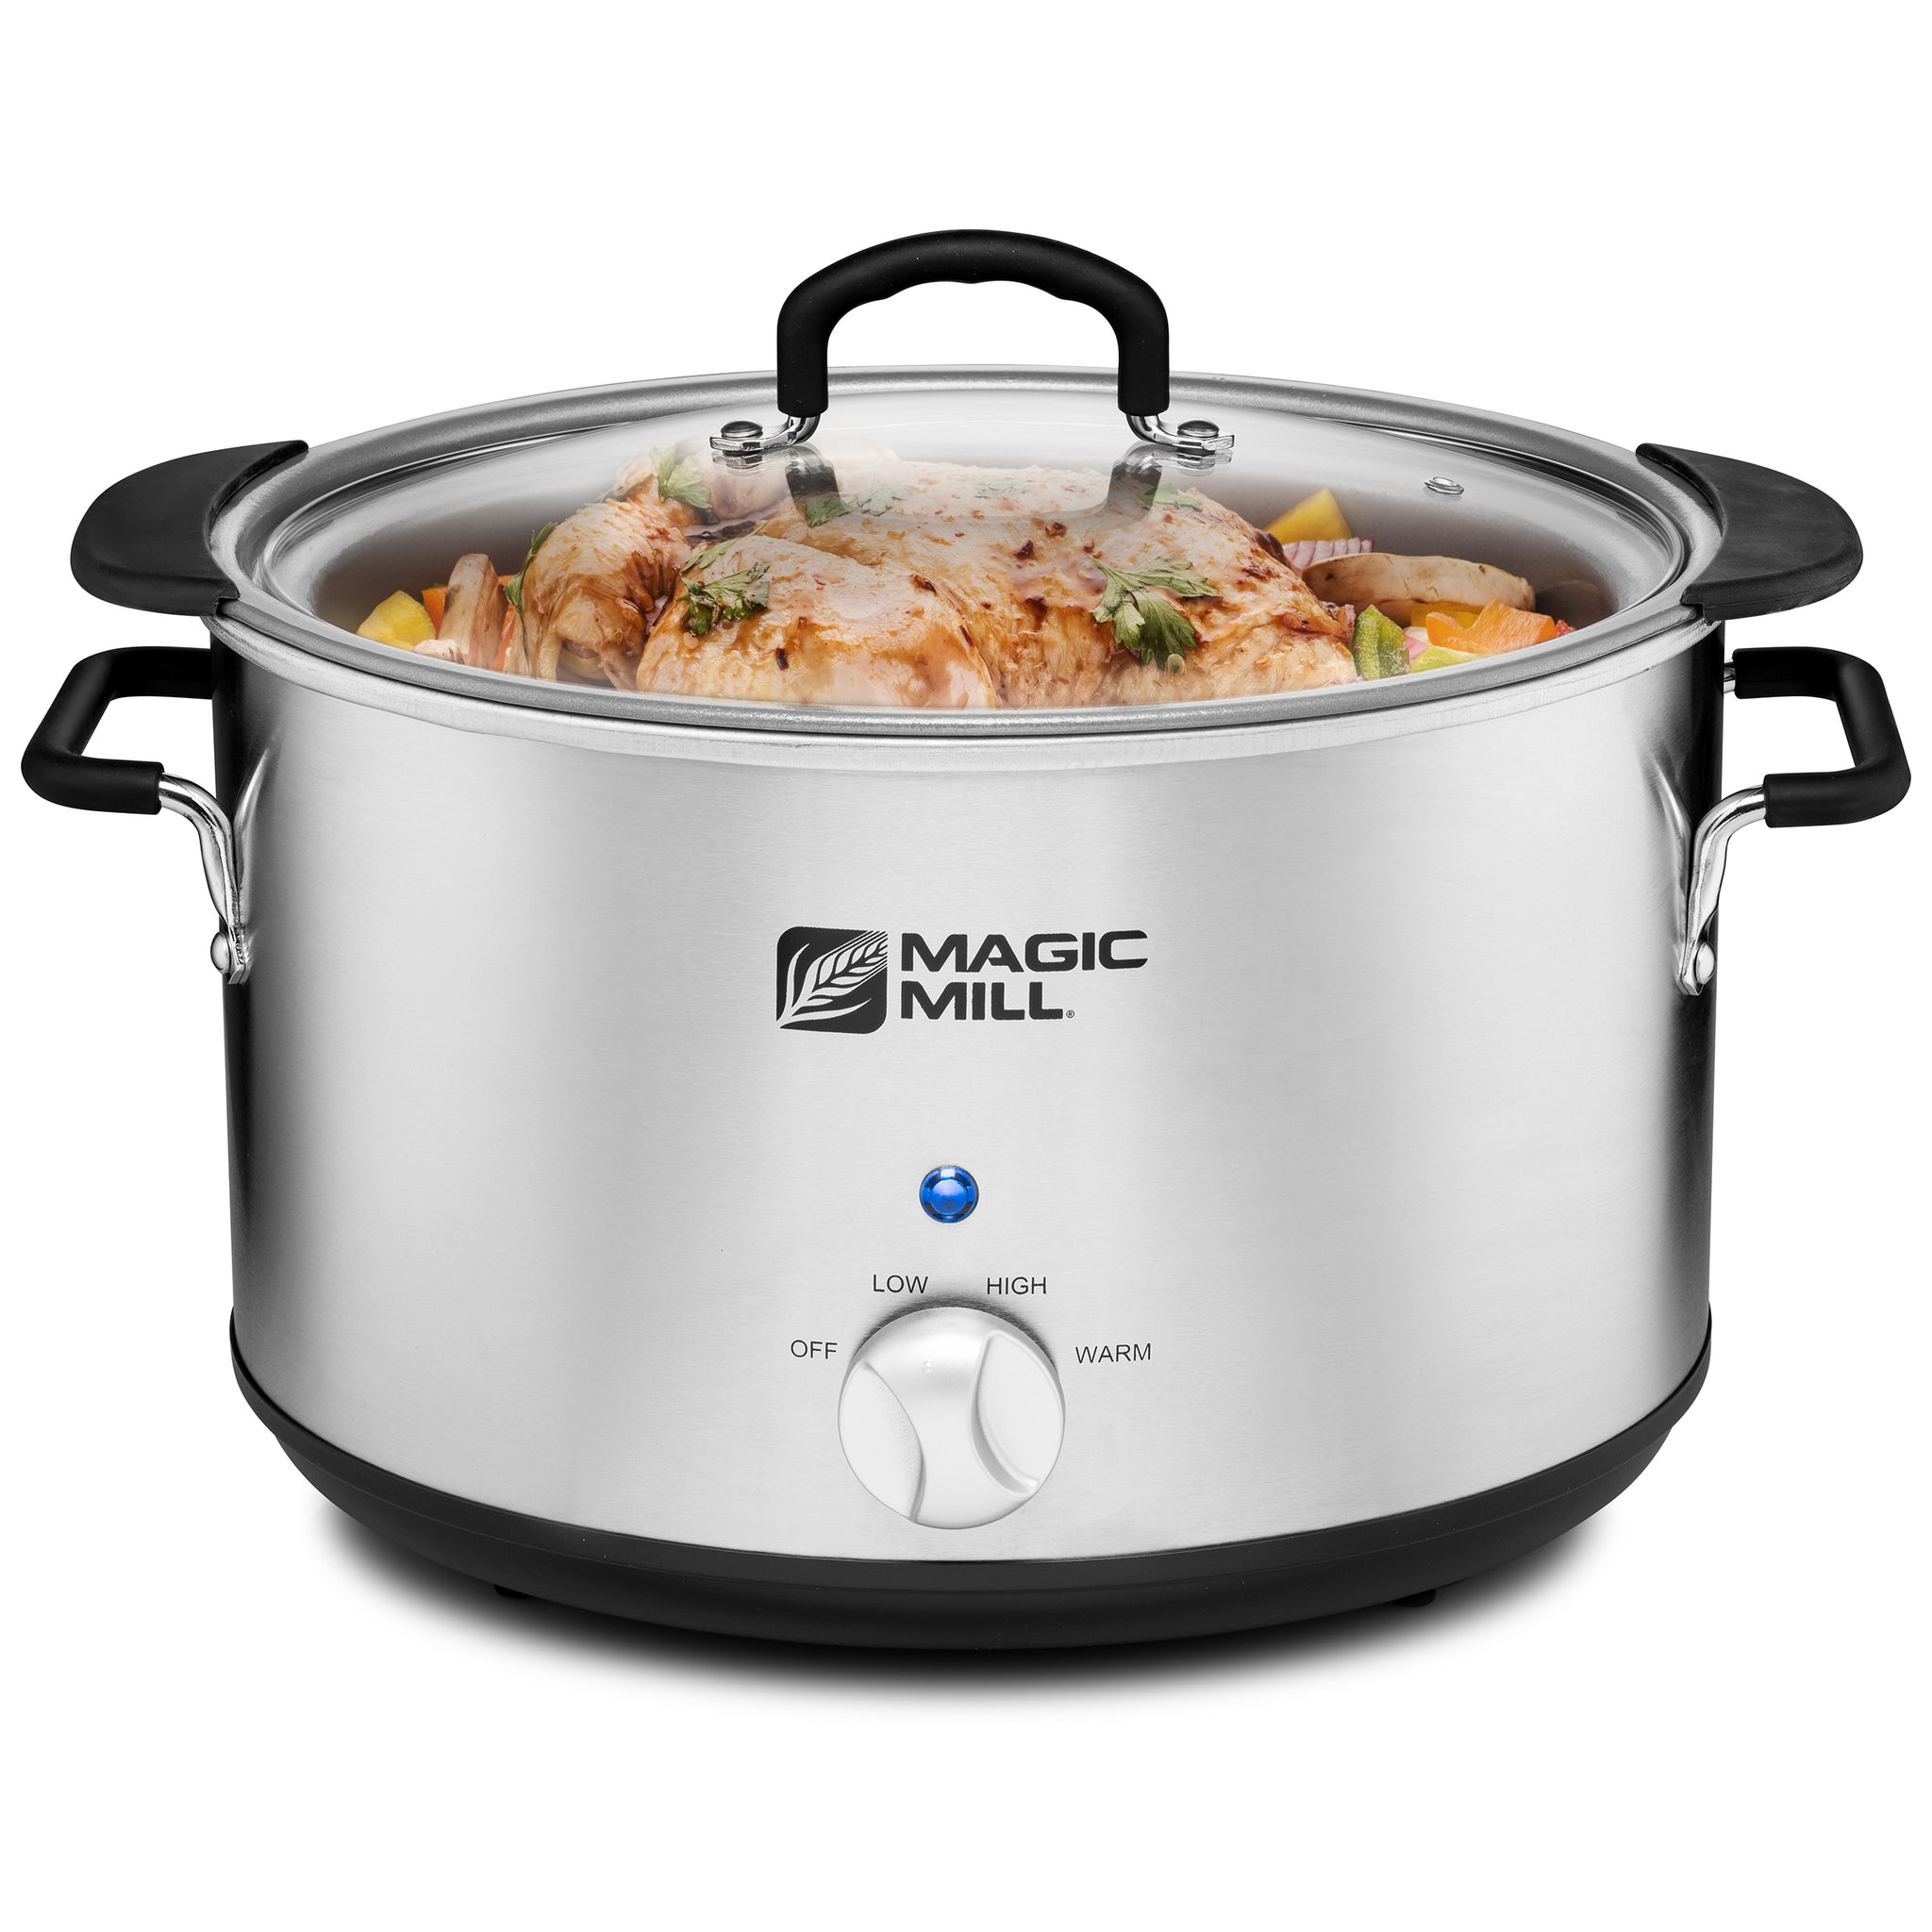 Magic mill oval slow cooker / crock pot-Available in 2 sizes –